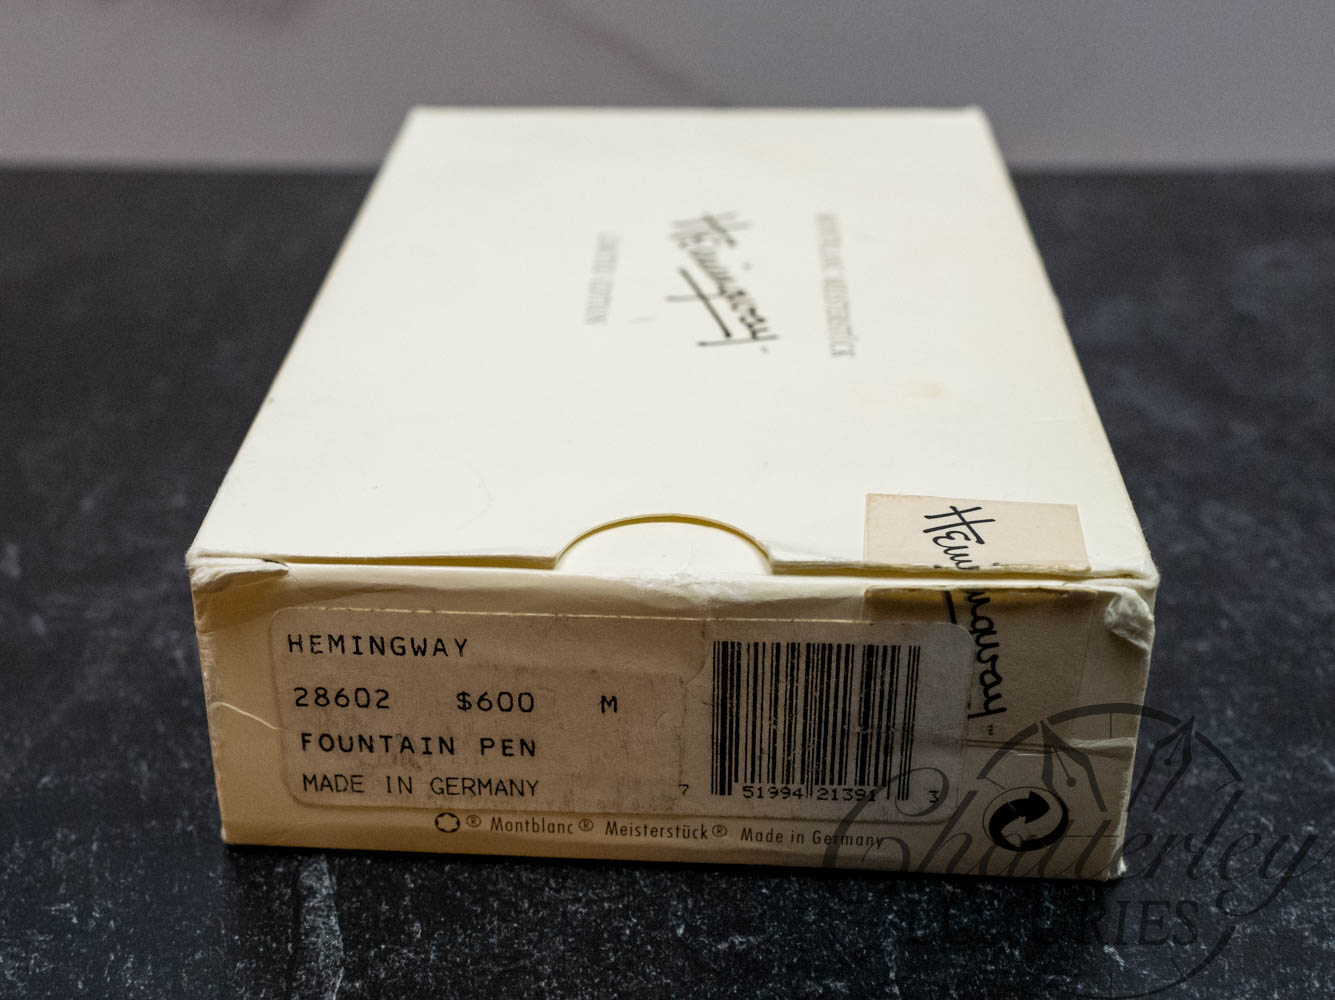 (Sealed) Montblanc Hemingway Limited Edition Fountain Pen - Chatterley